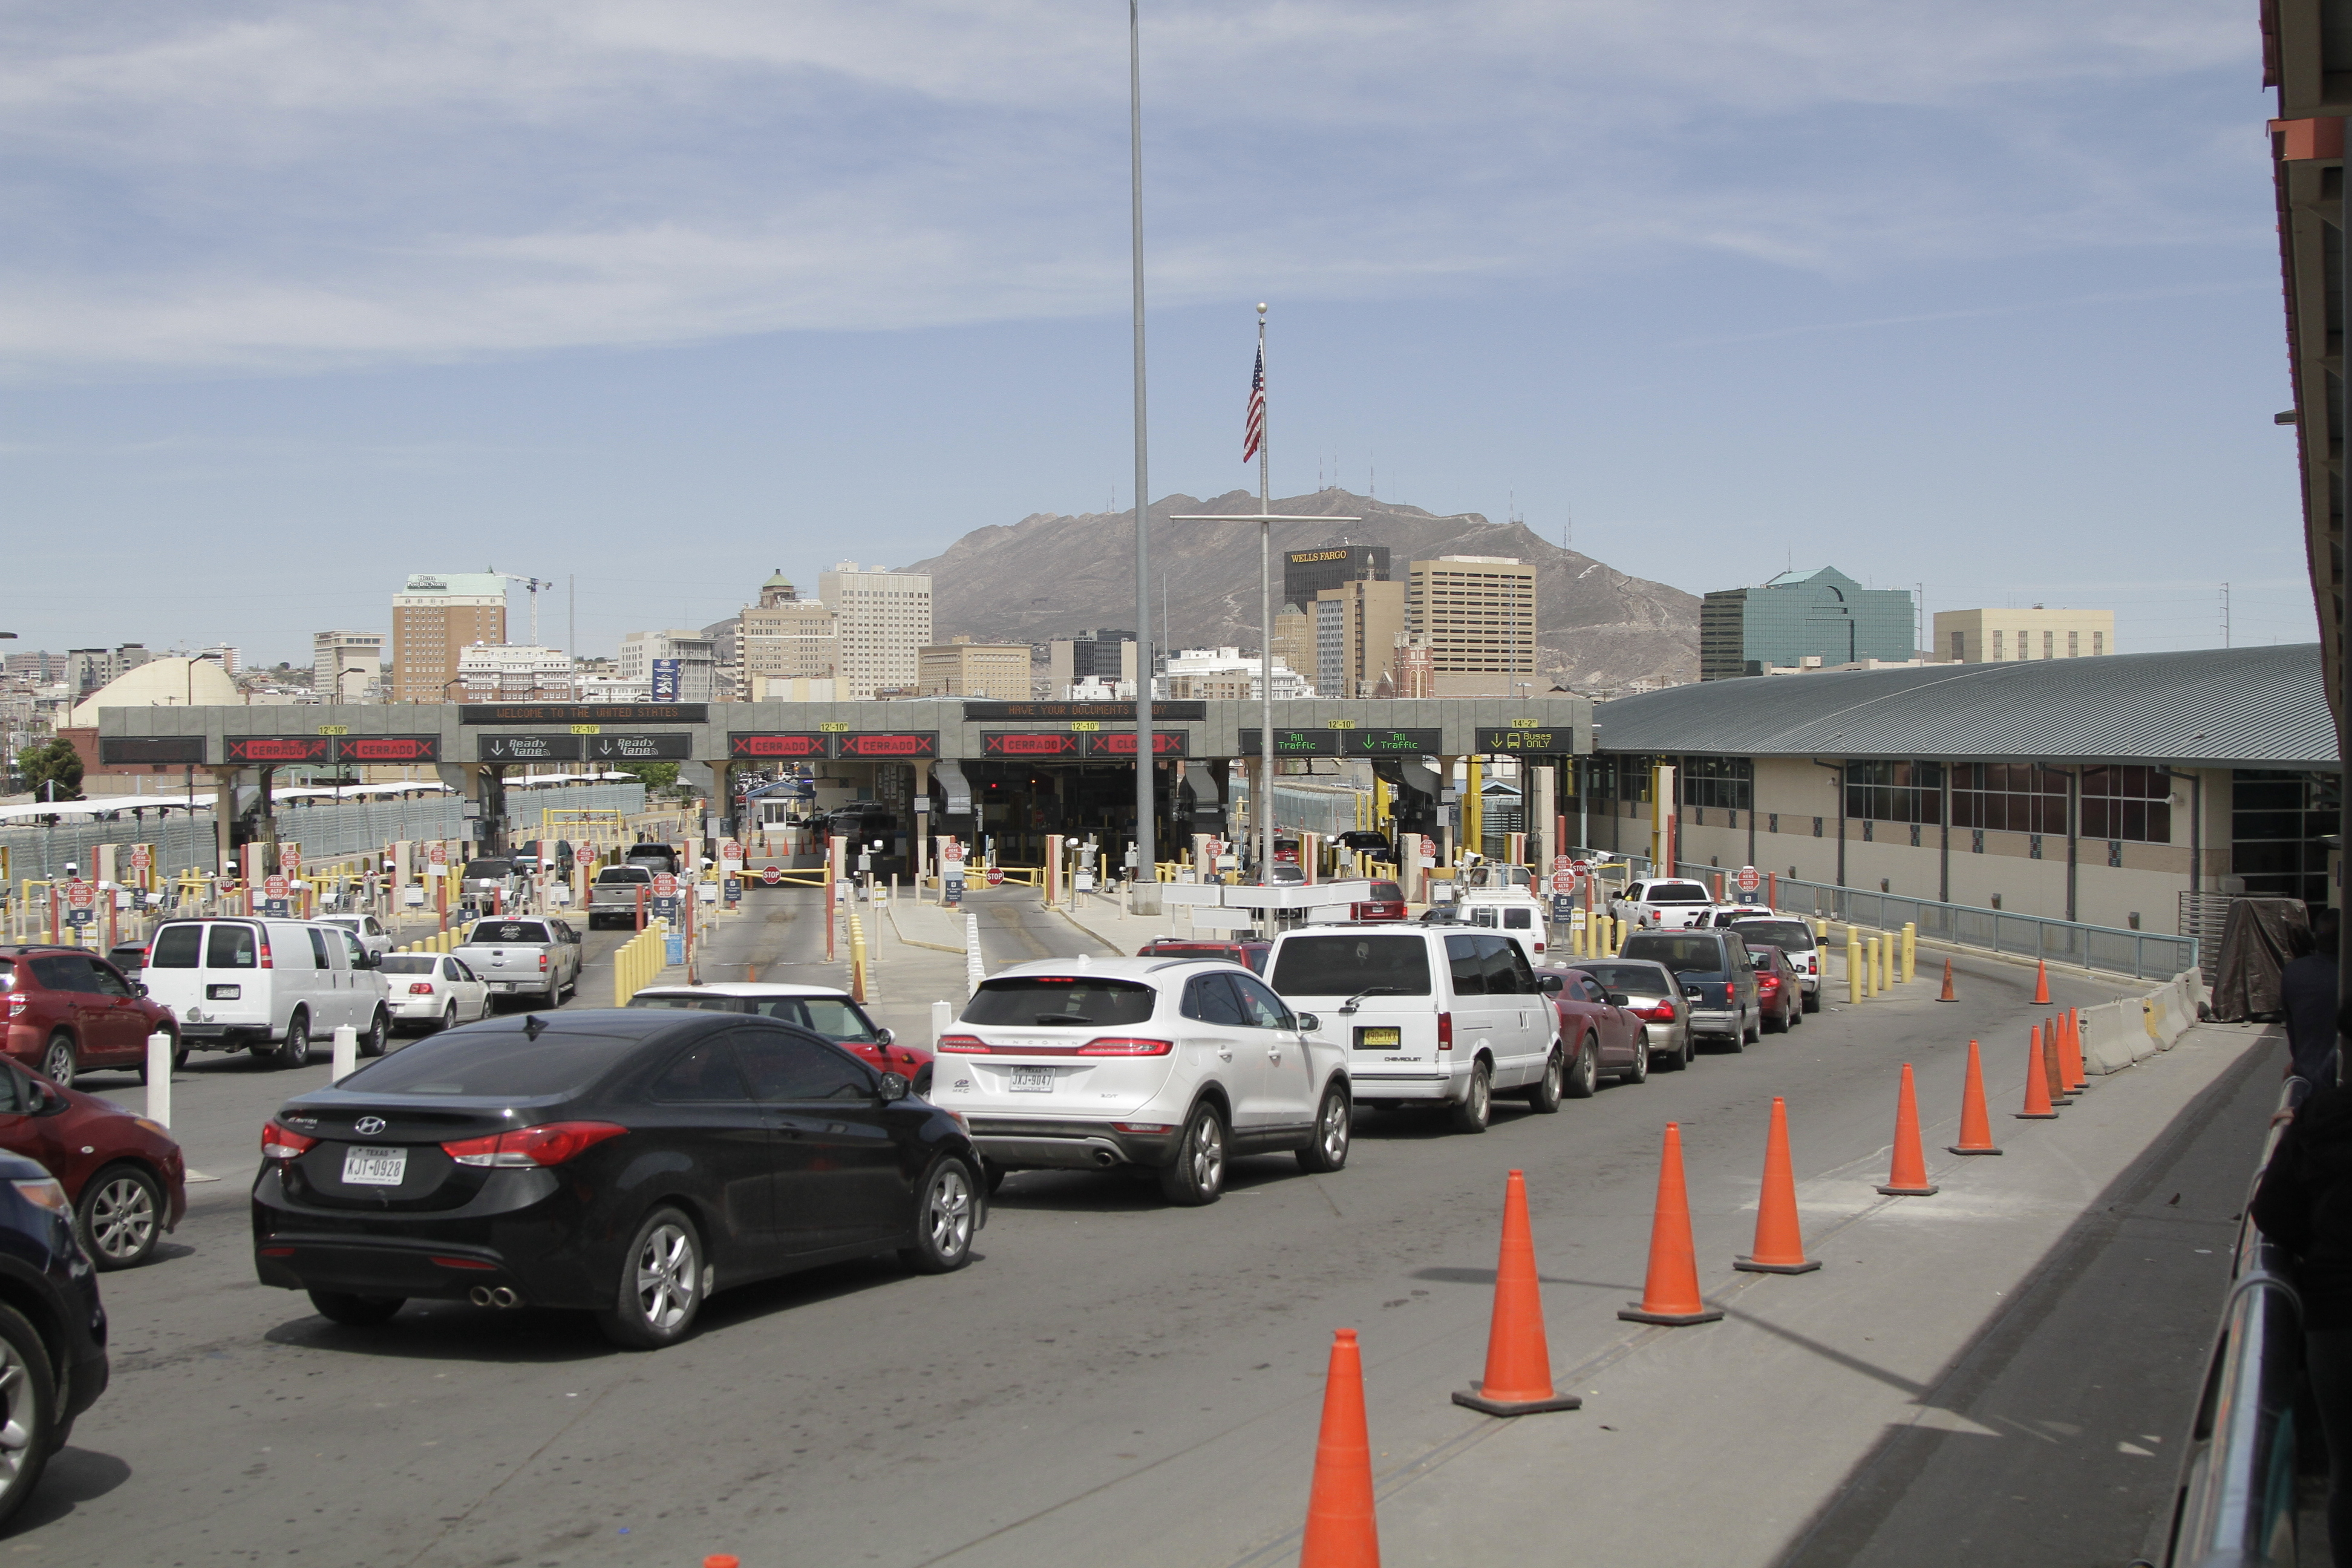 Vehicles from Mexico and the U.S. approach a border crossing in El Paso, Texas, Monday, April 1, 2019. 